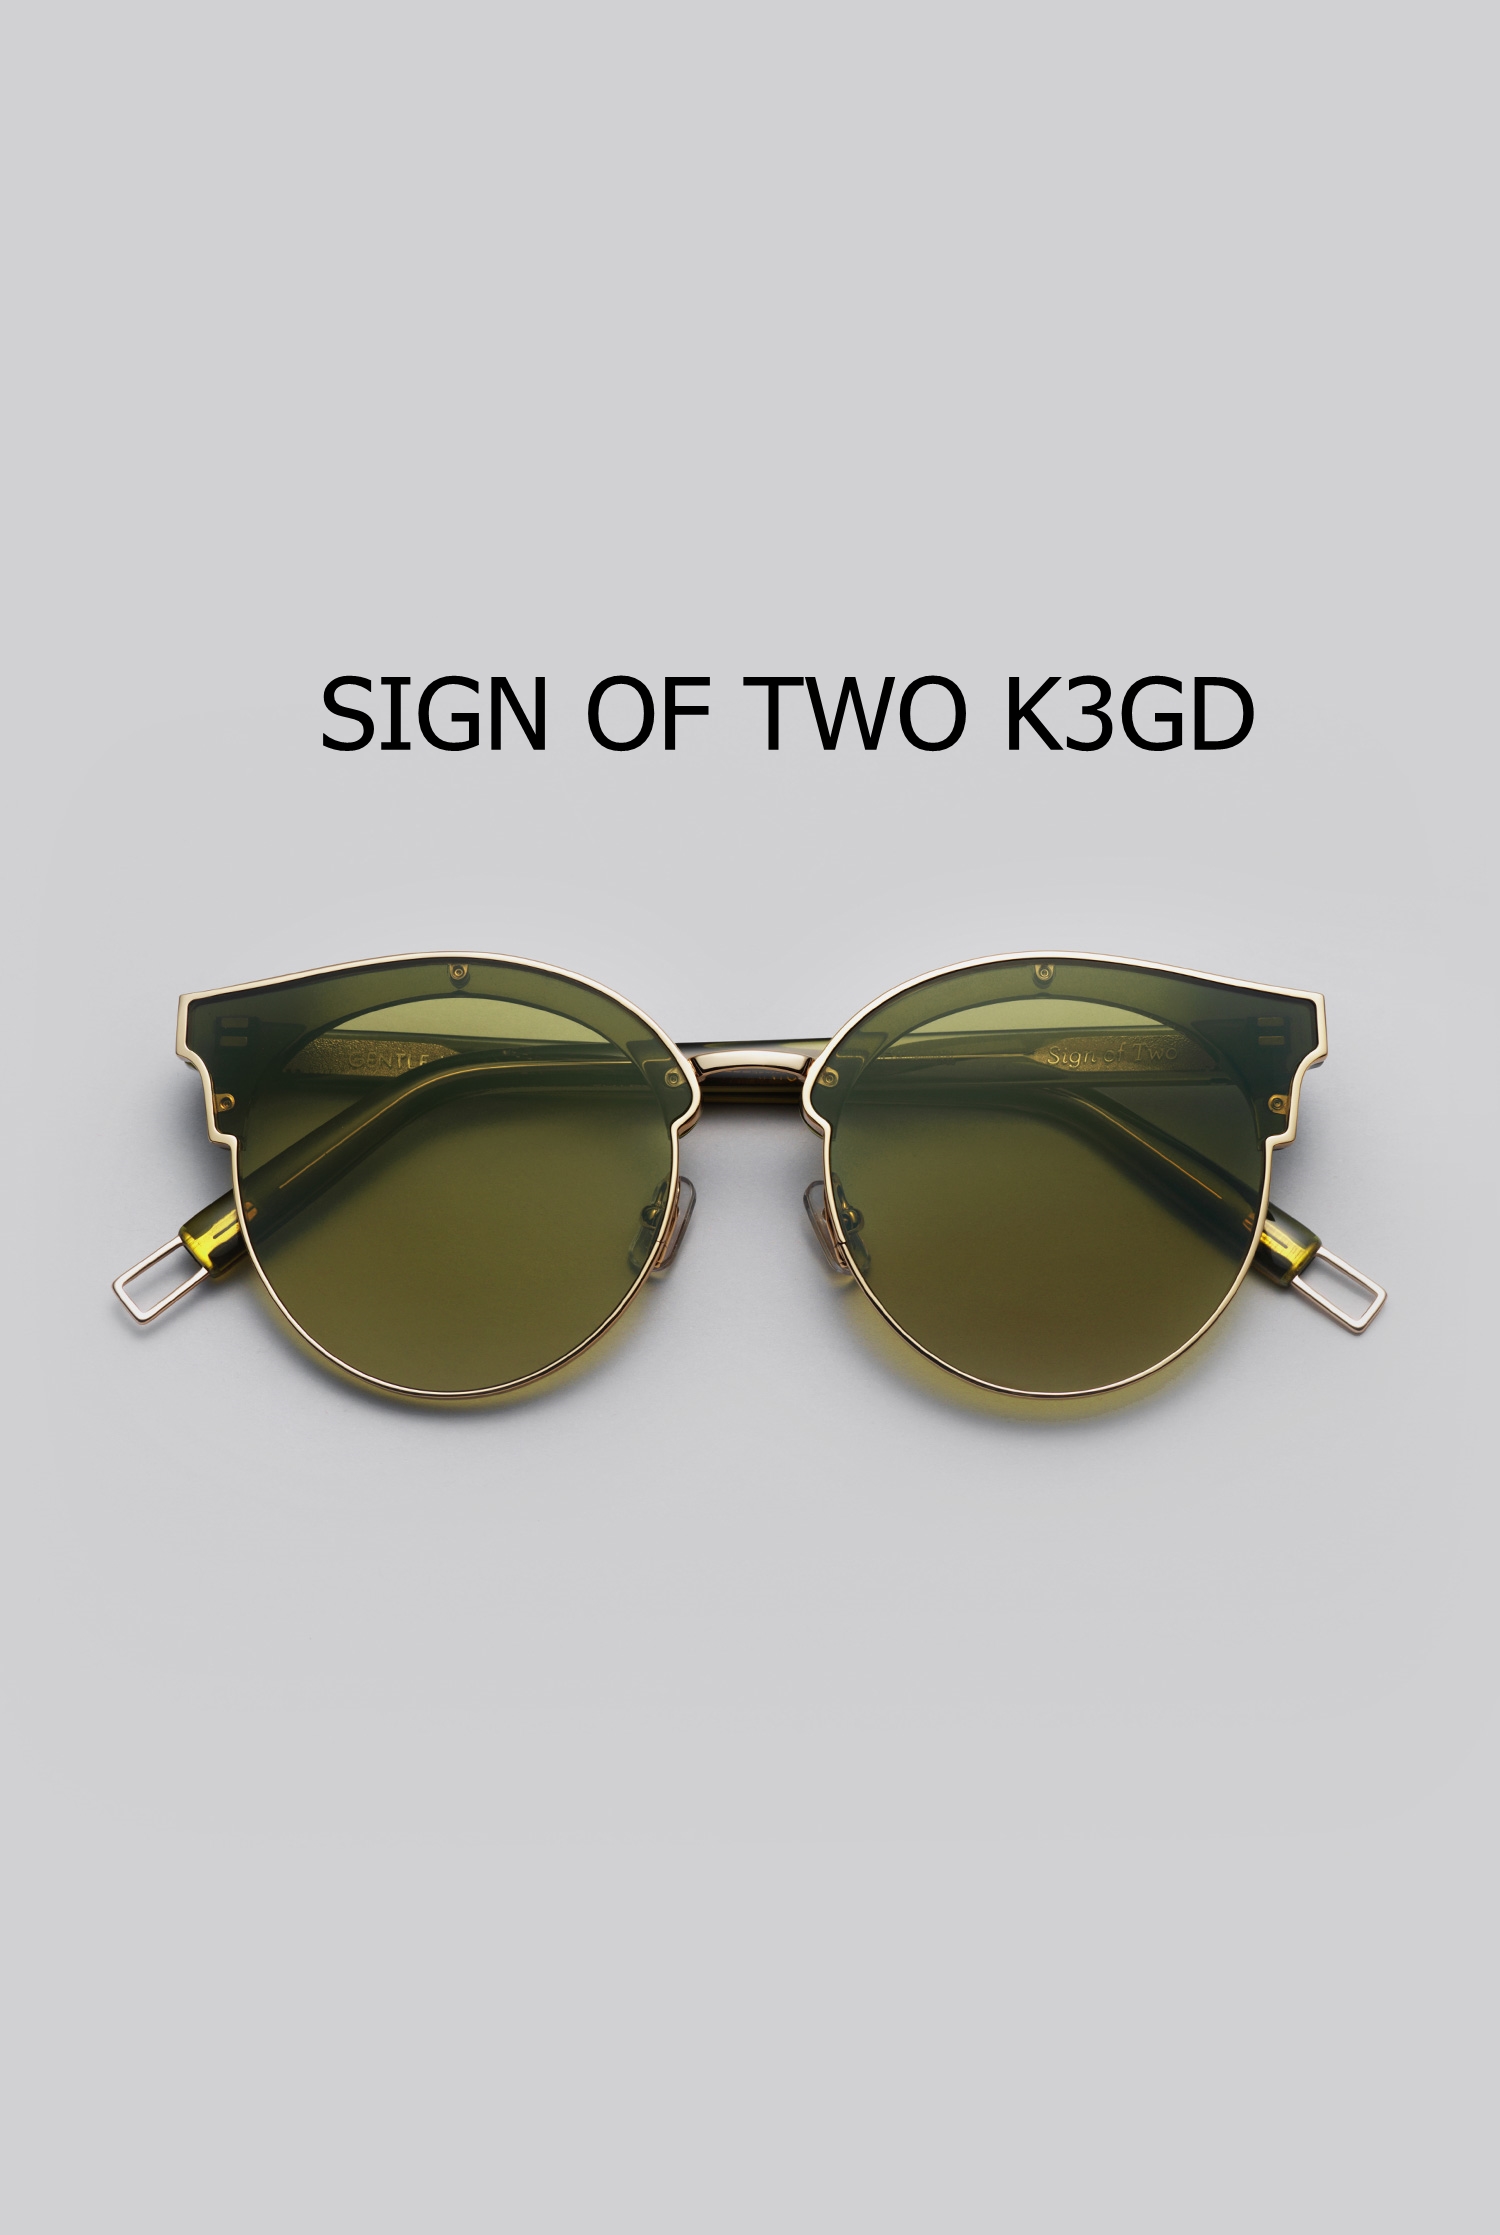 SIGN OF TWO K3GD